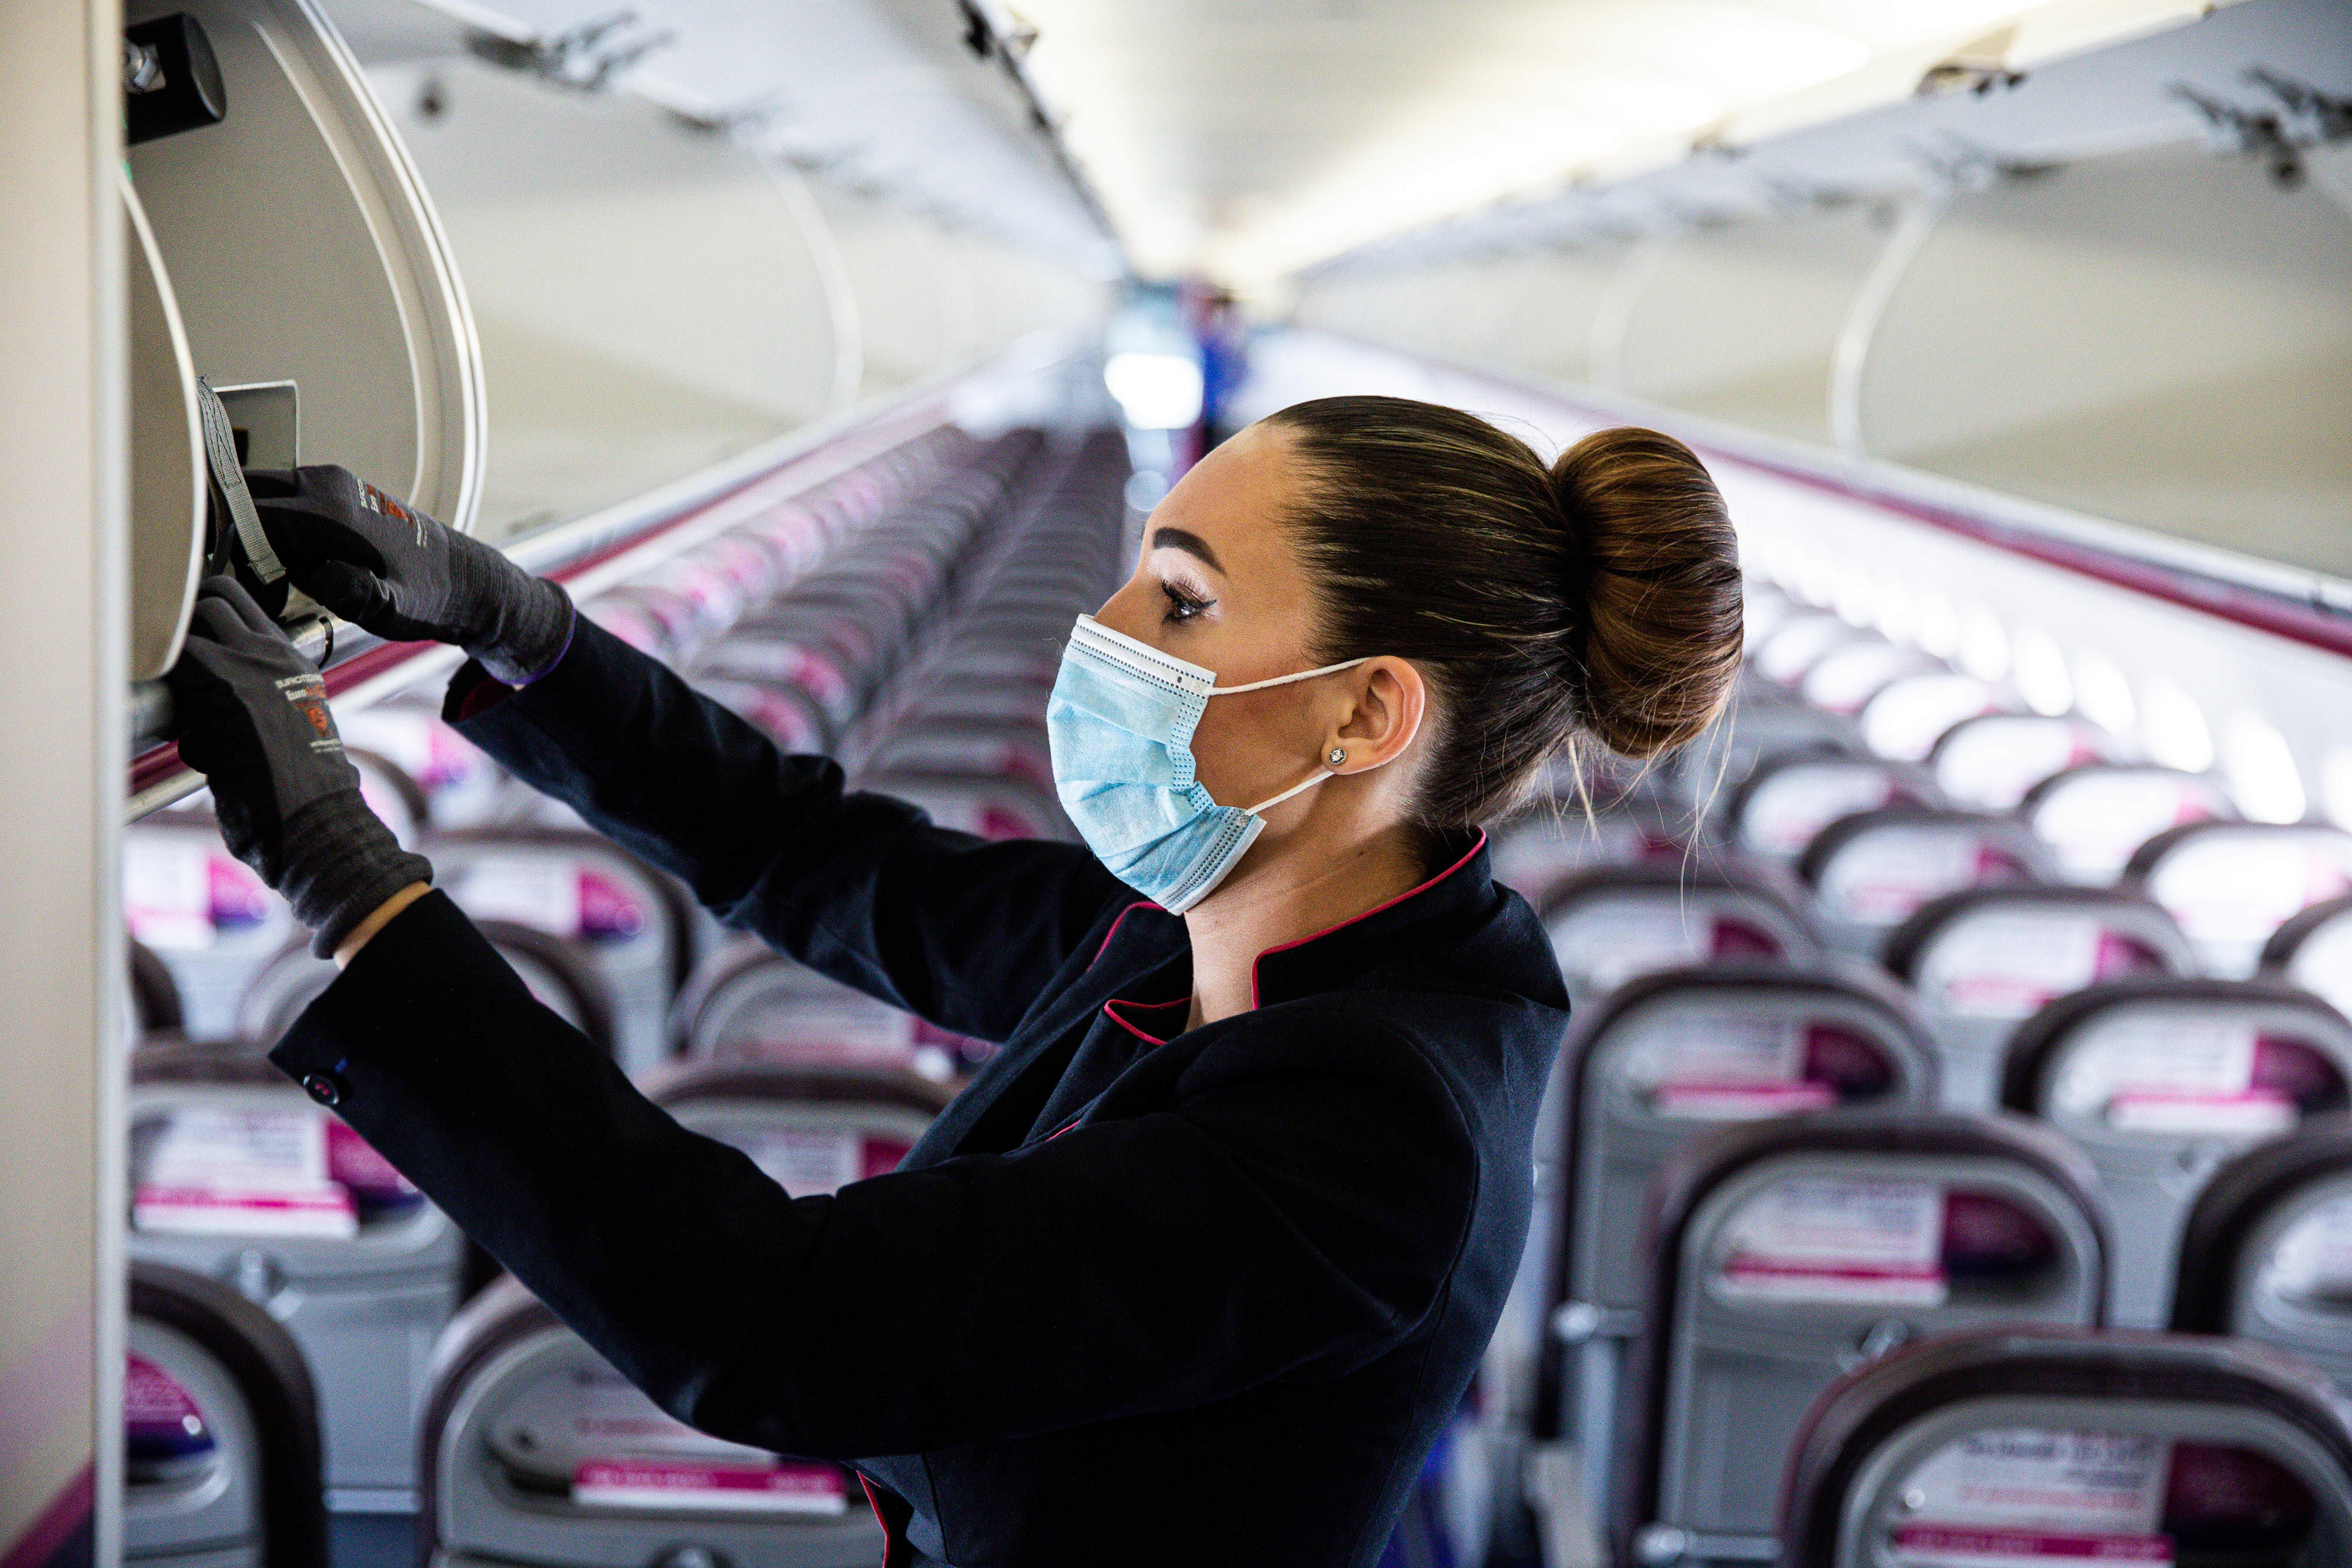 Wizz Air Cuts Carbon Intensity by 11%